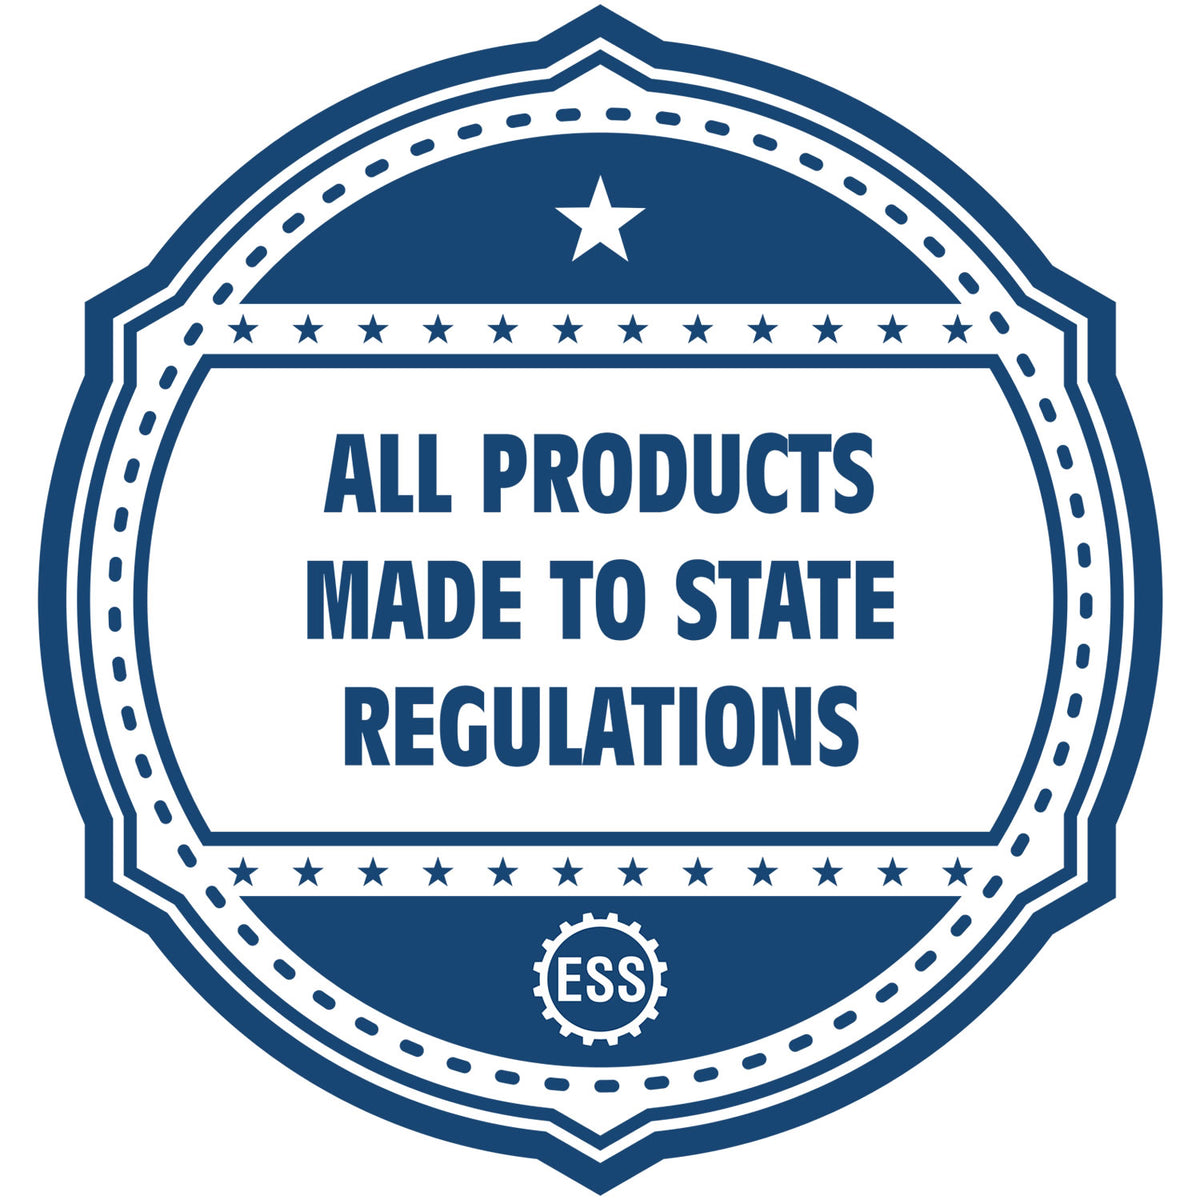 An icon or badge element for the Soft North Carolina Professional Engineer Seal showing that this product is made in compliance with state regulations.